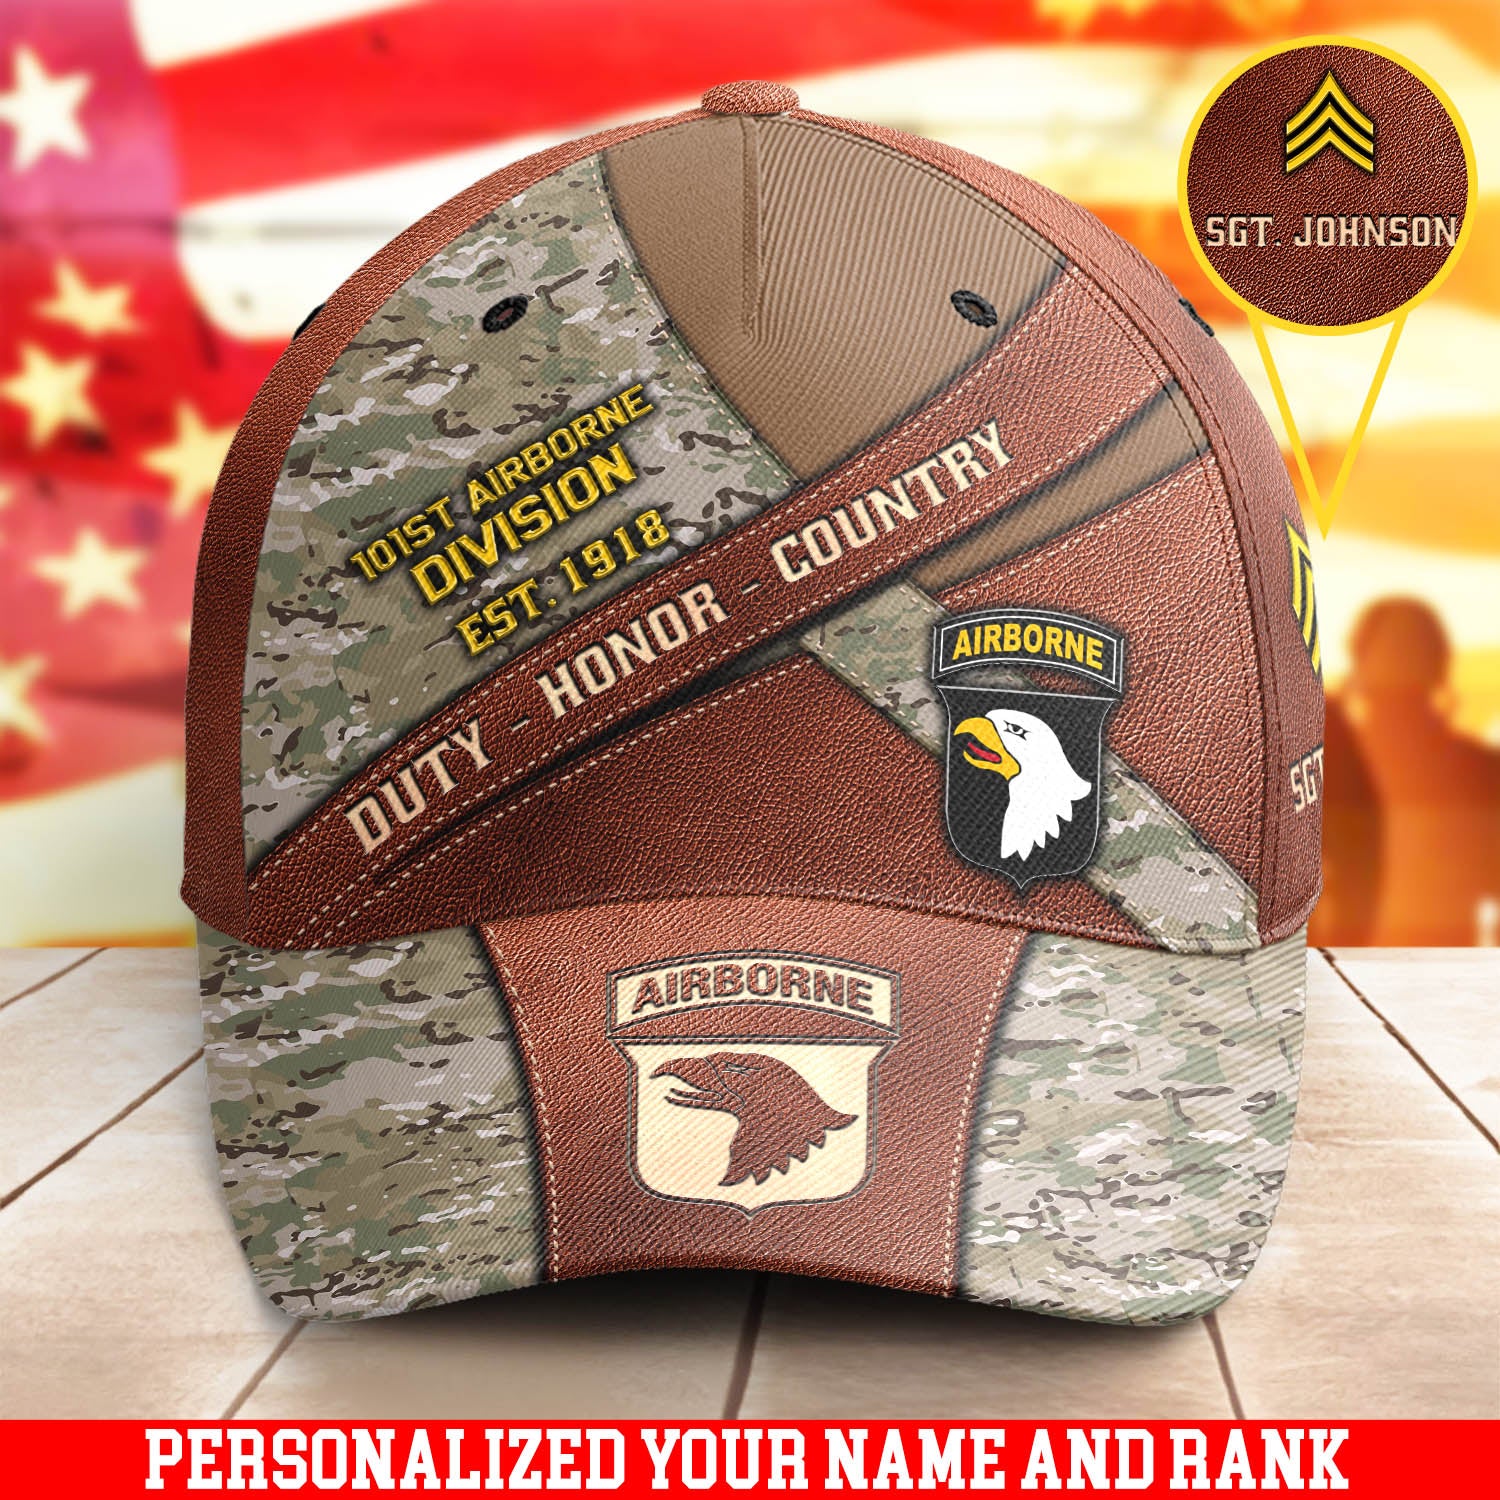 Airborne Screaming Eagle Cap 101st Airborne Division Duty Honor Country Camo Cap Personalized Soldier Gift